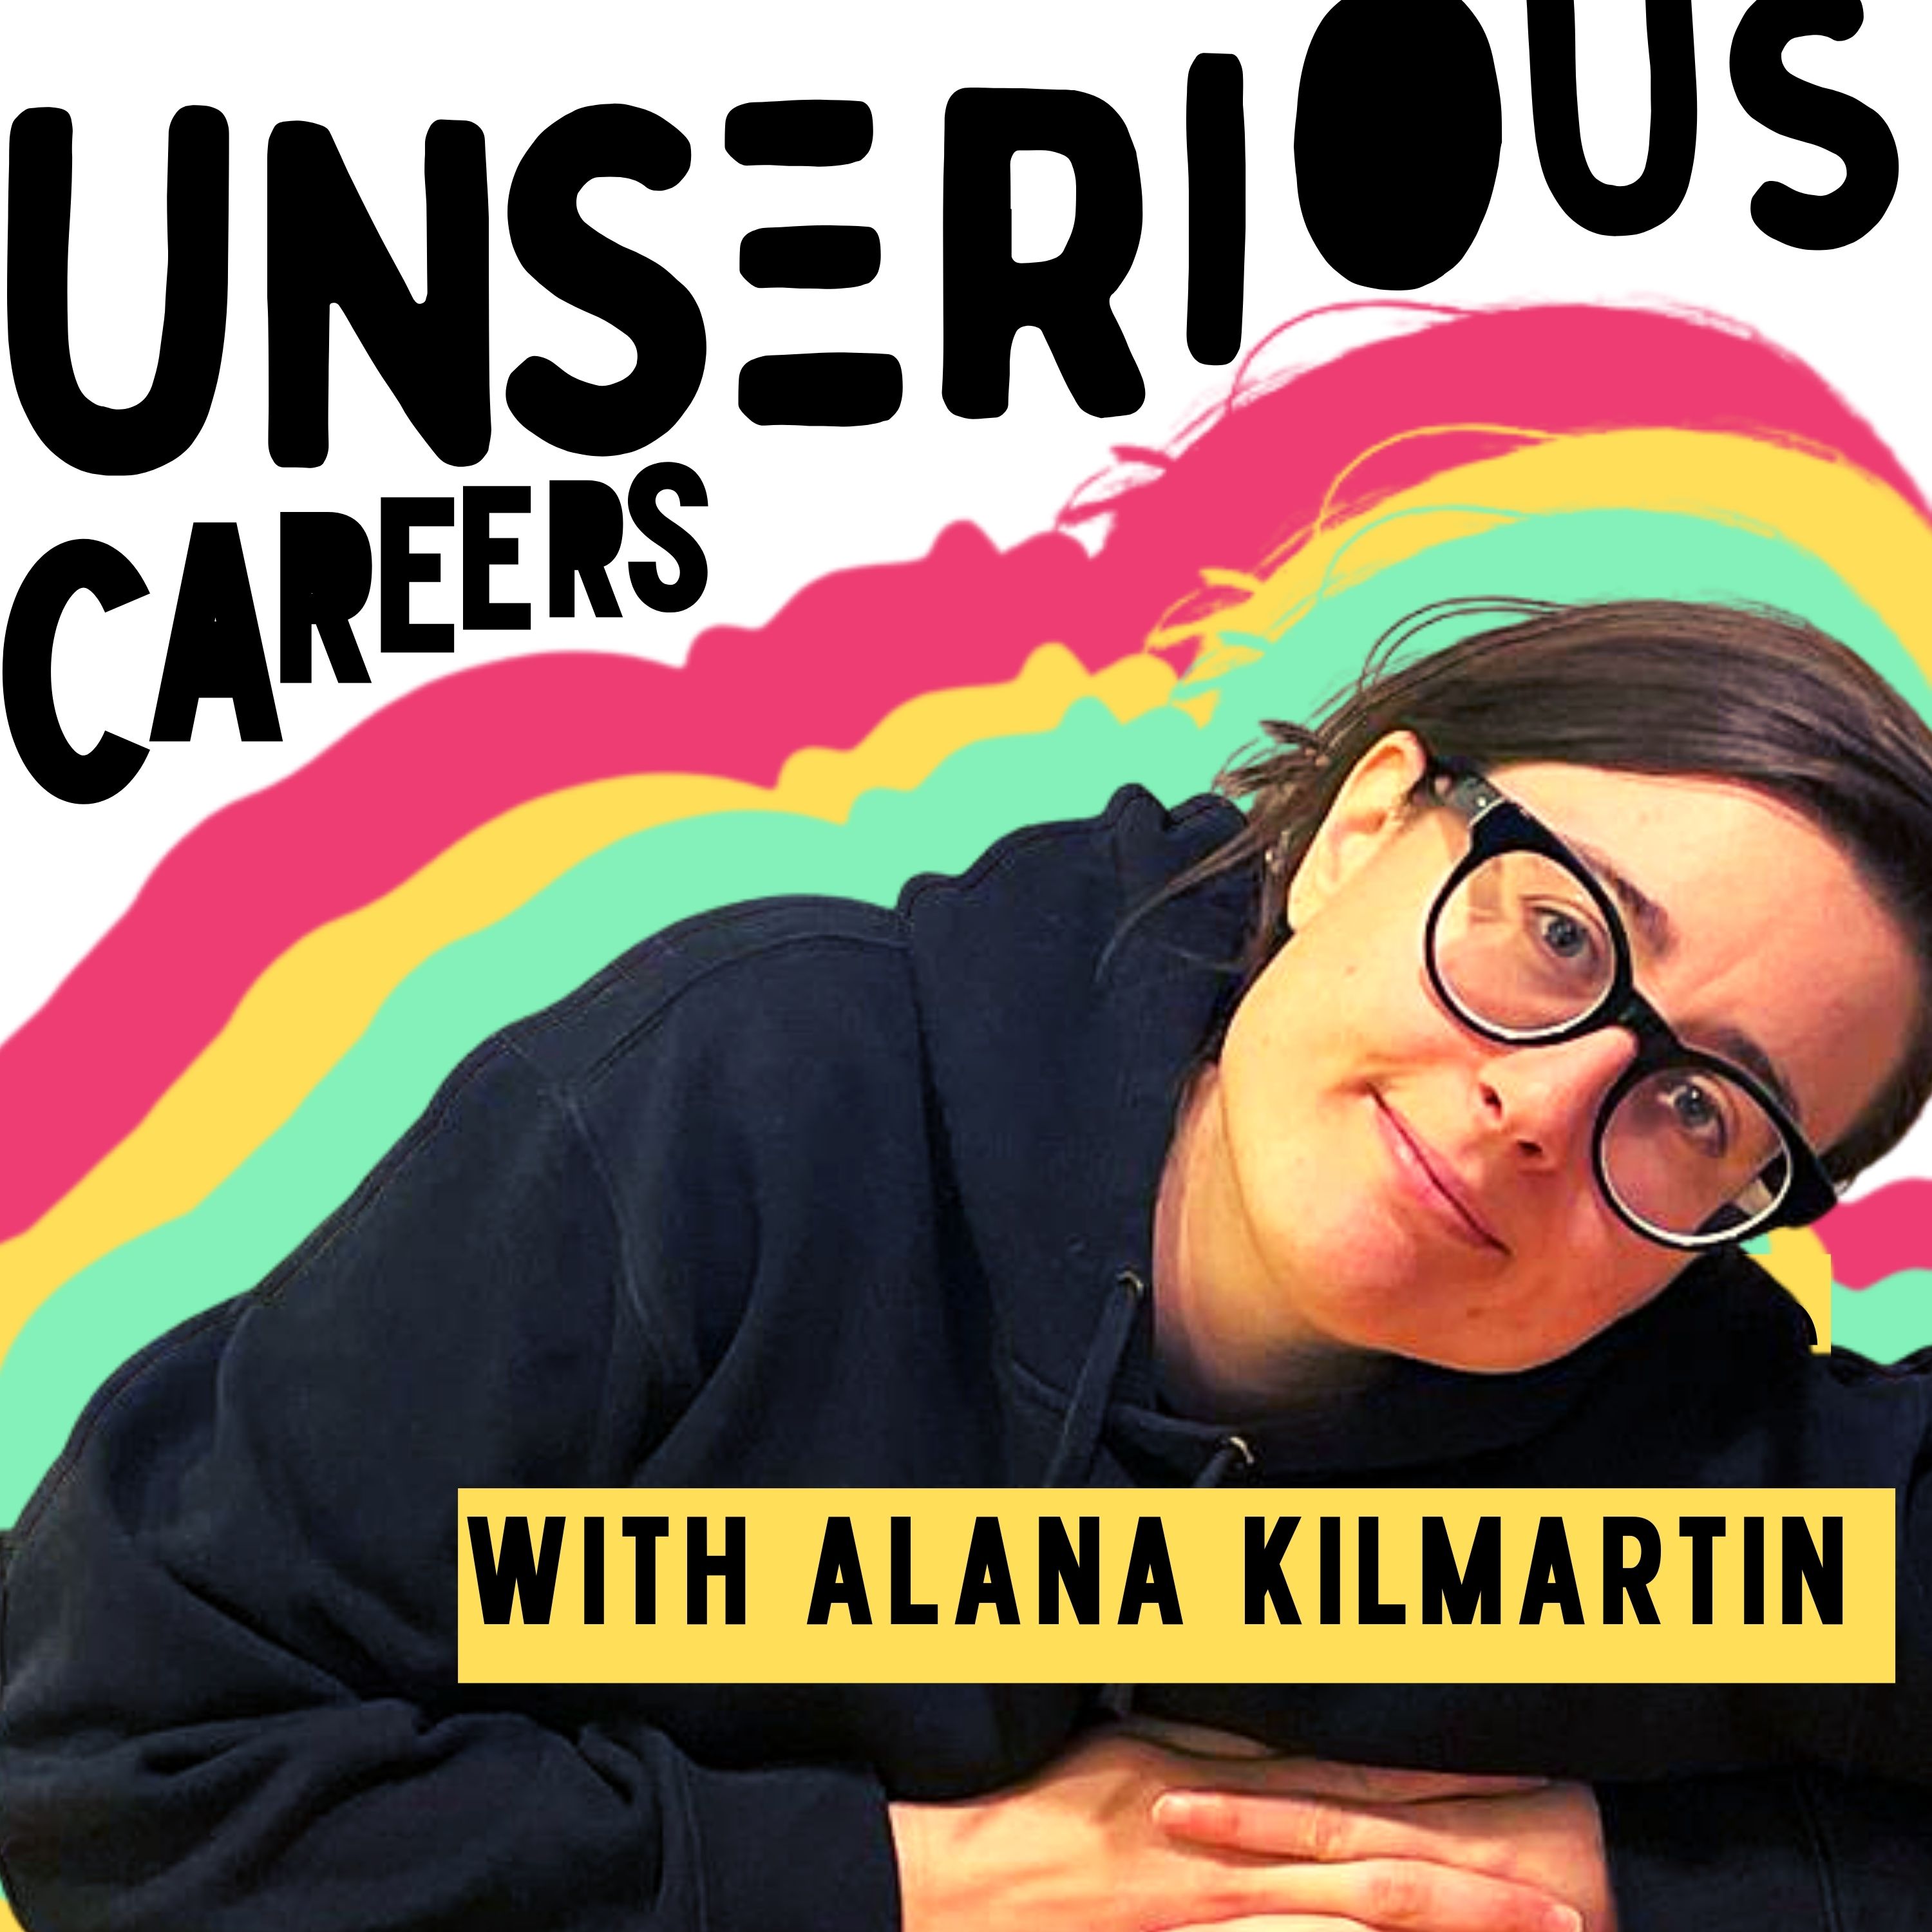 Artwork for podcast Unserious Careers